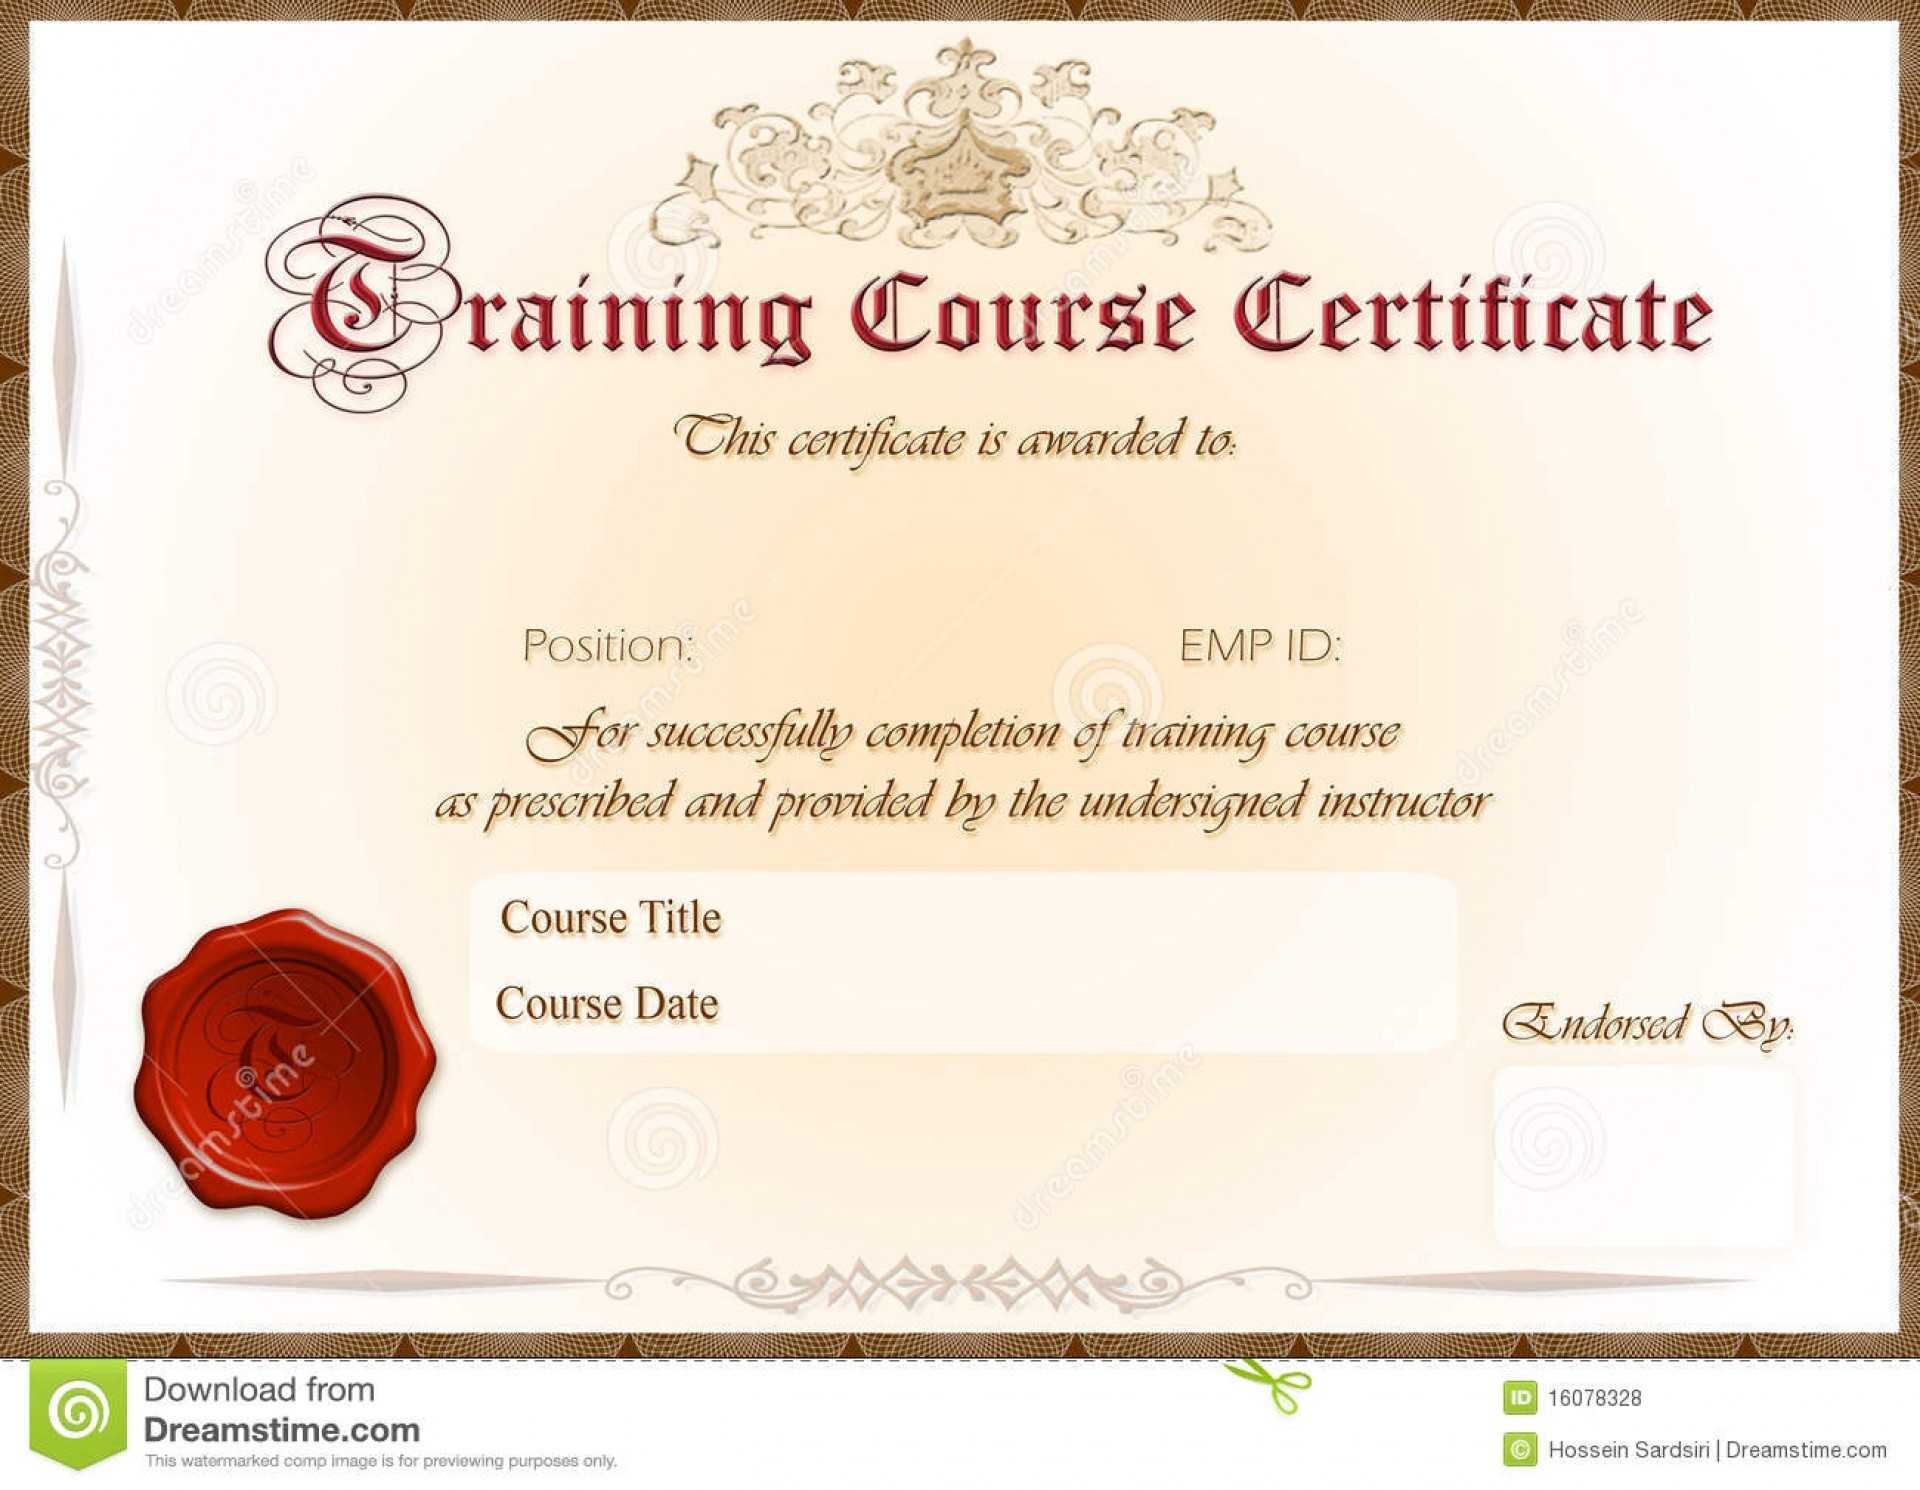 026 Template Ideas Certificates Free Gift Certificate Makes Within This Certificate Entitles The Bearer To Template